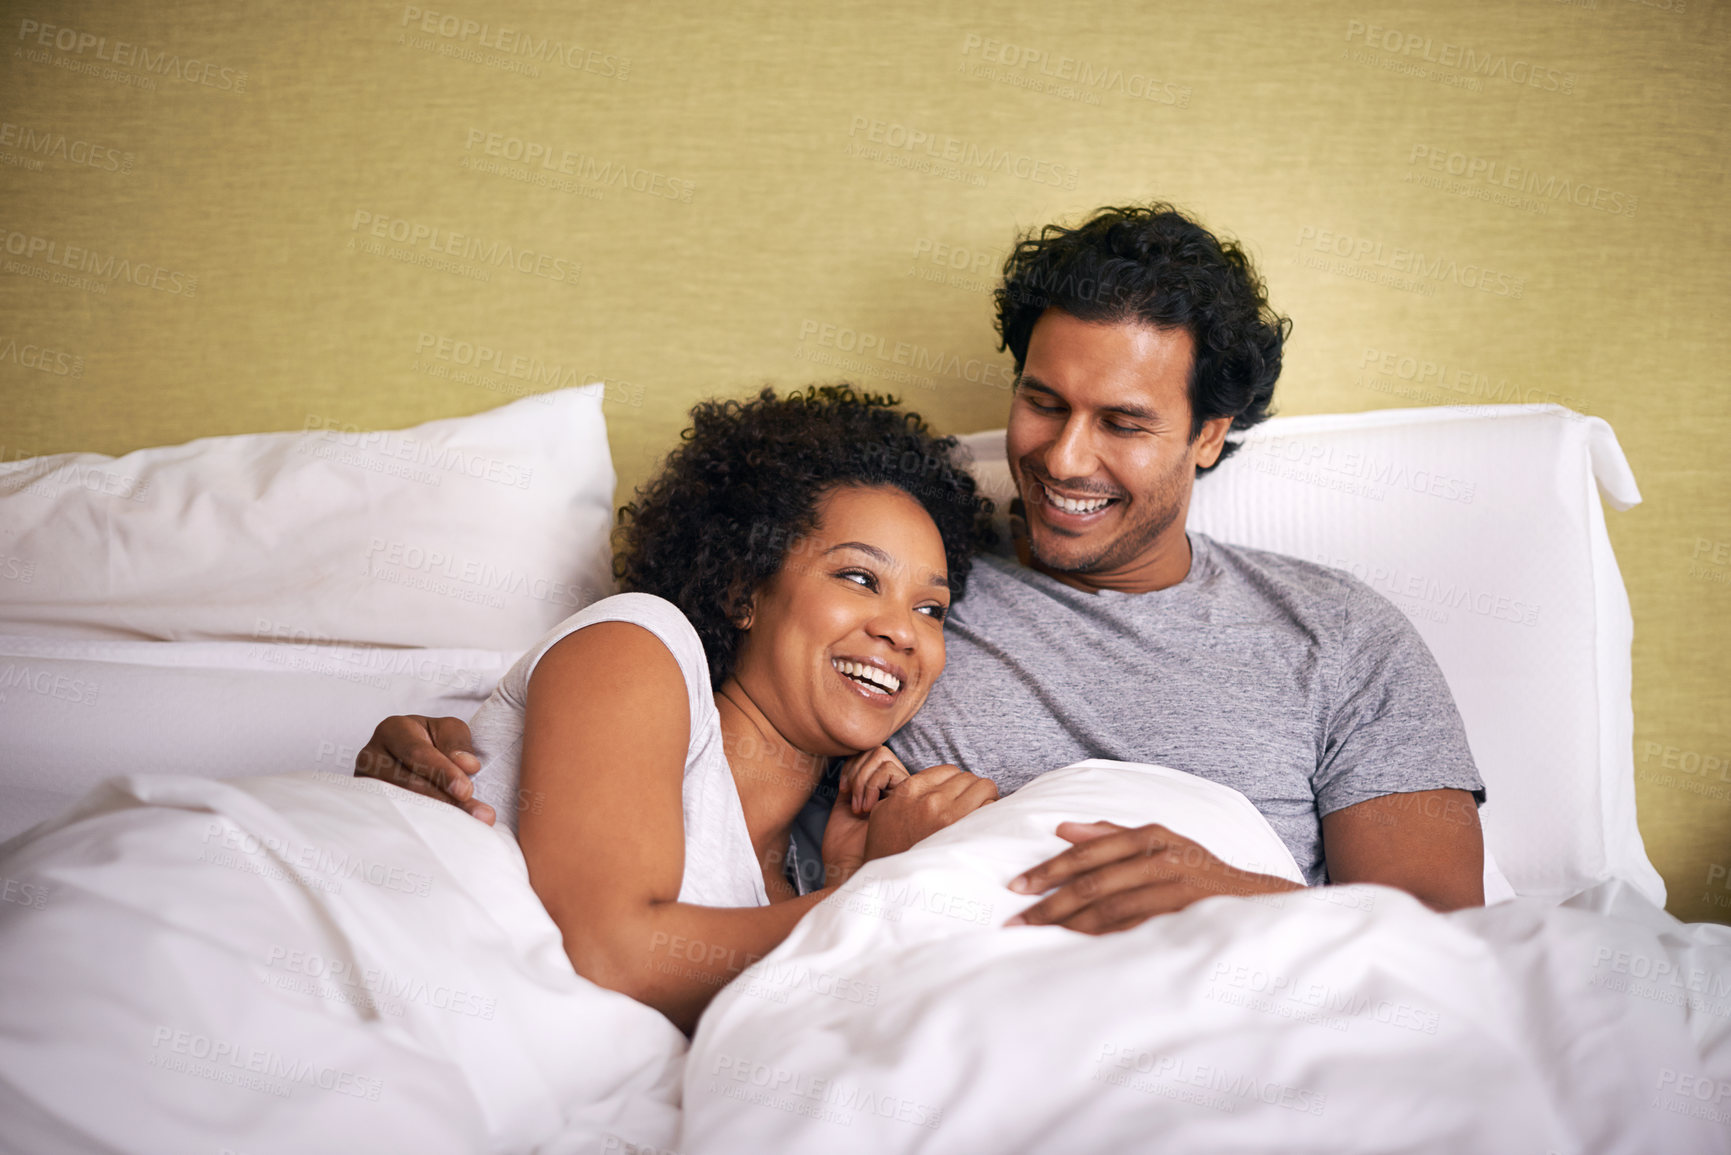 Buy stock photo A young husband and wife lying bed together